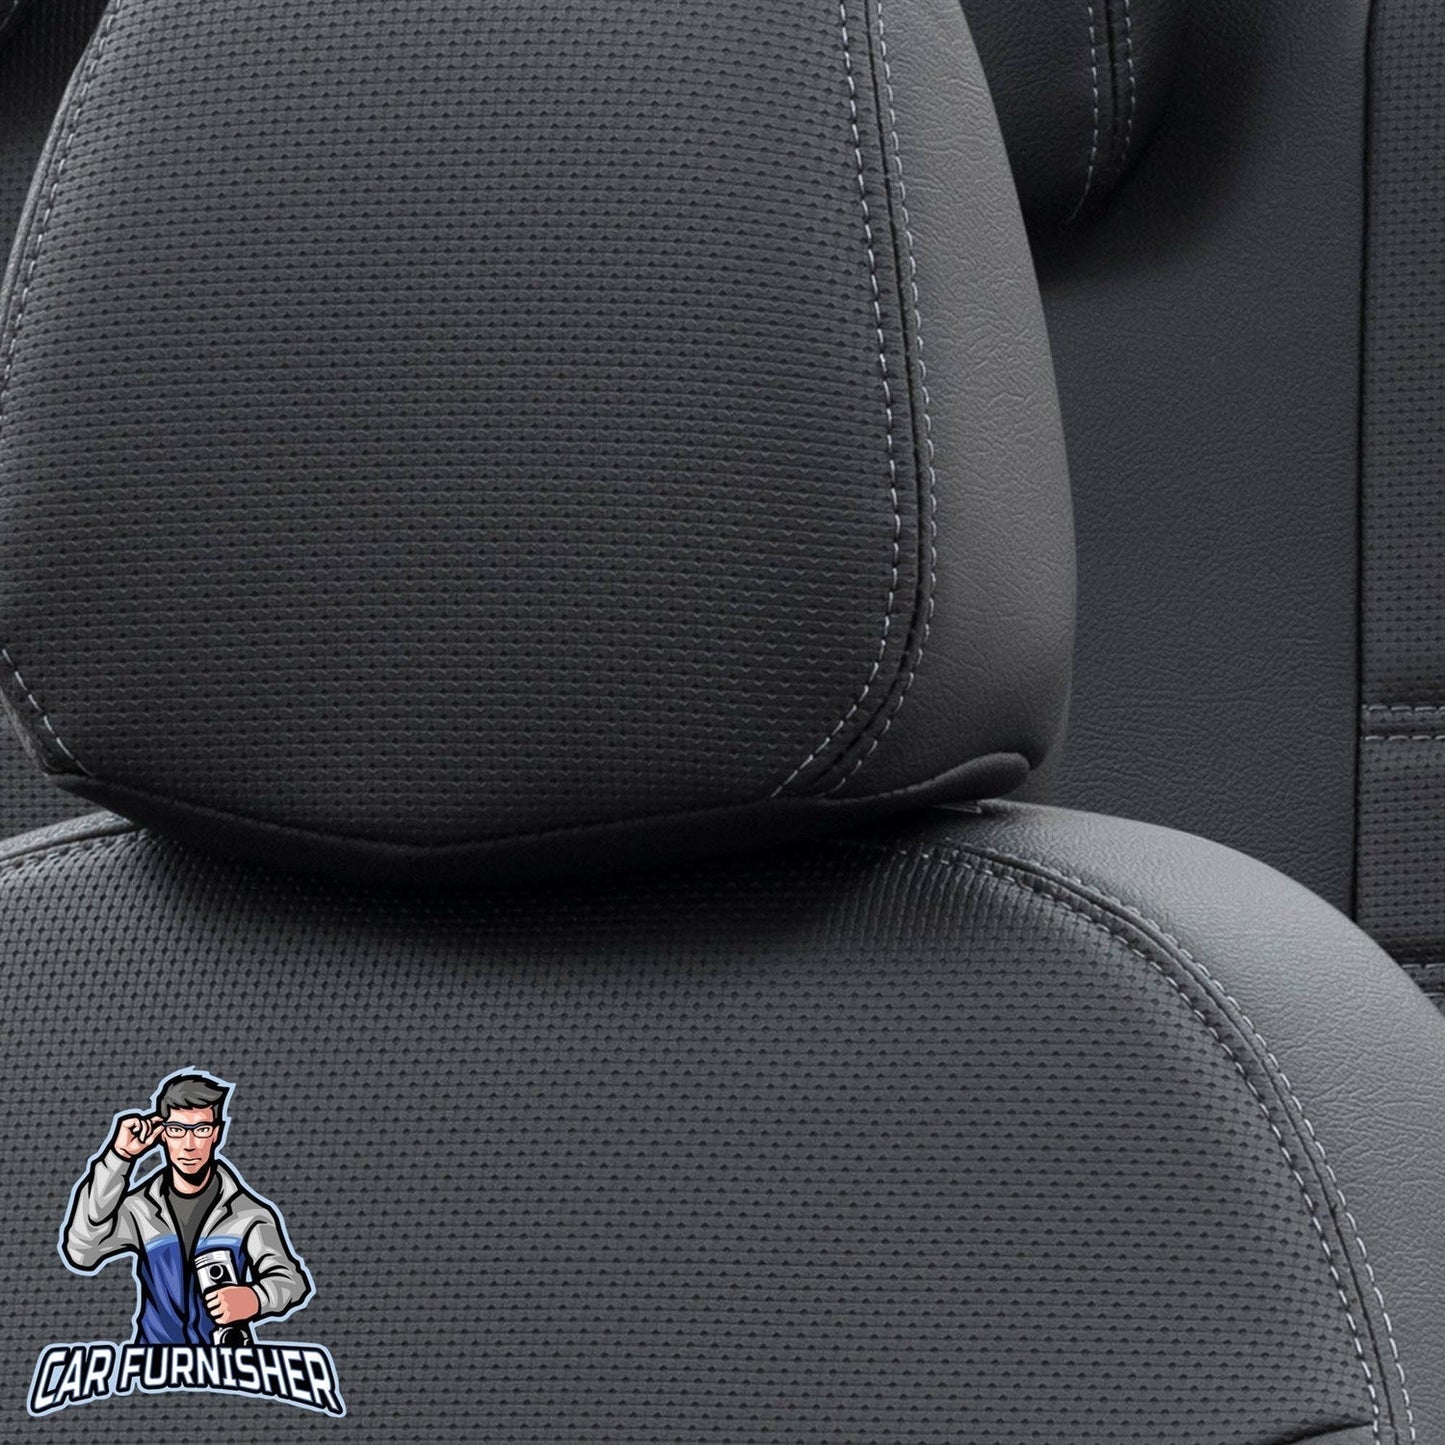 Renault Twingo Seat Cover New York Leather Design Black Leather